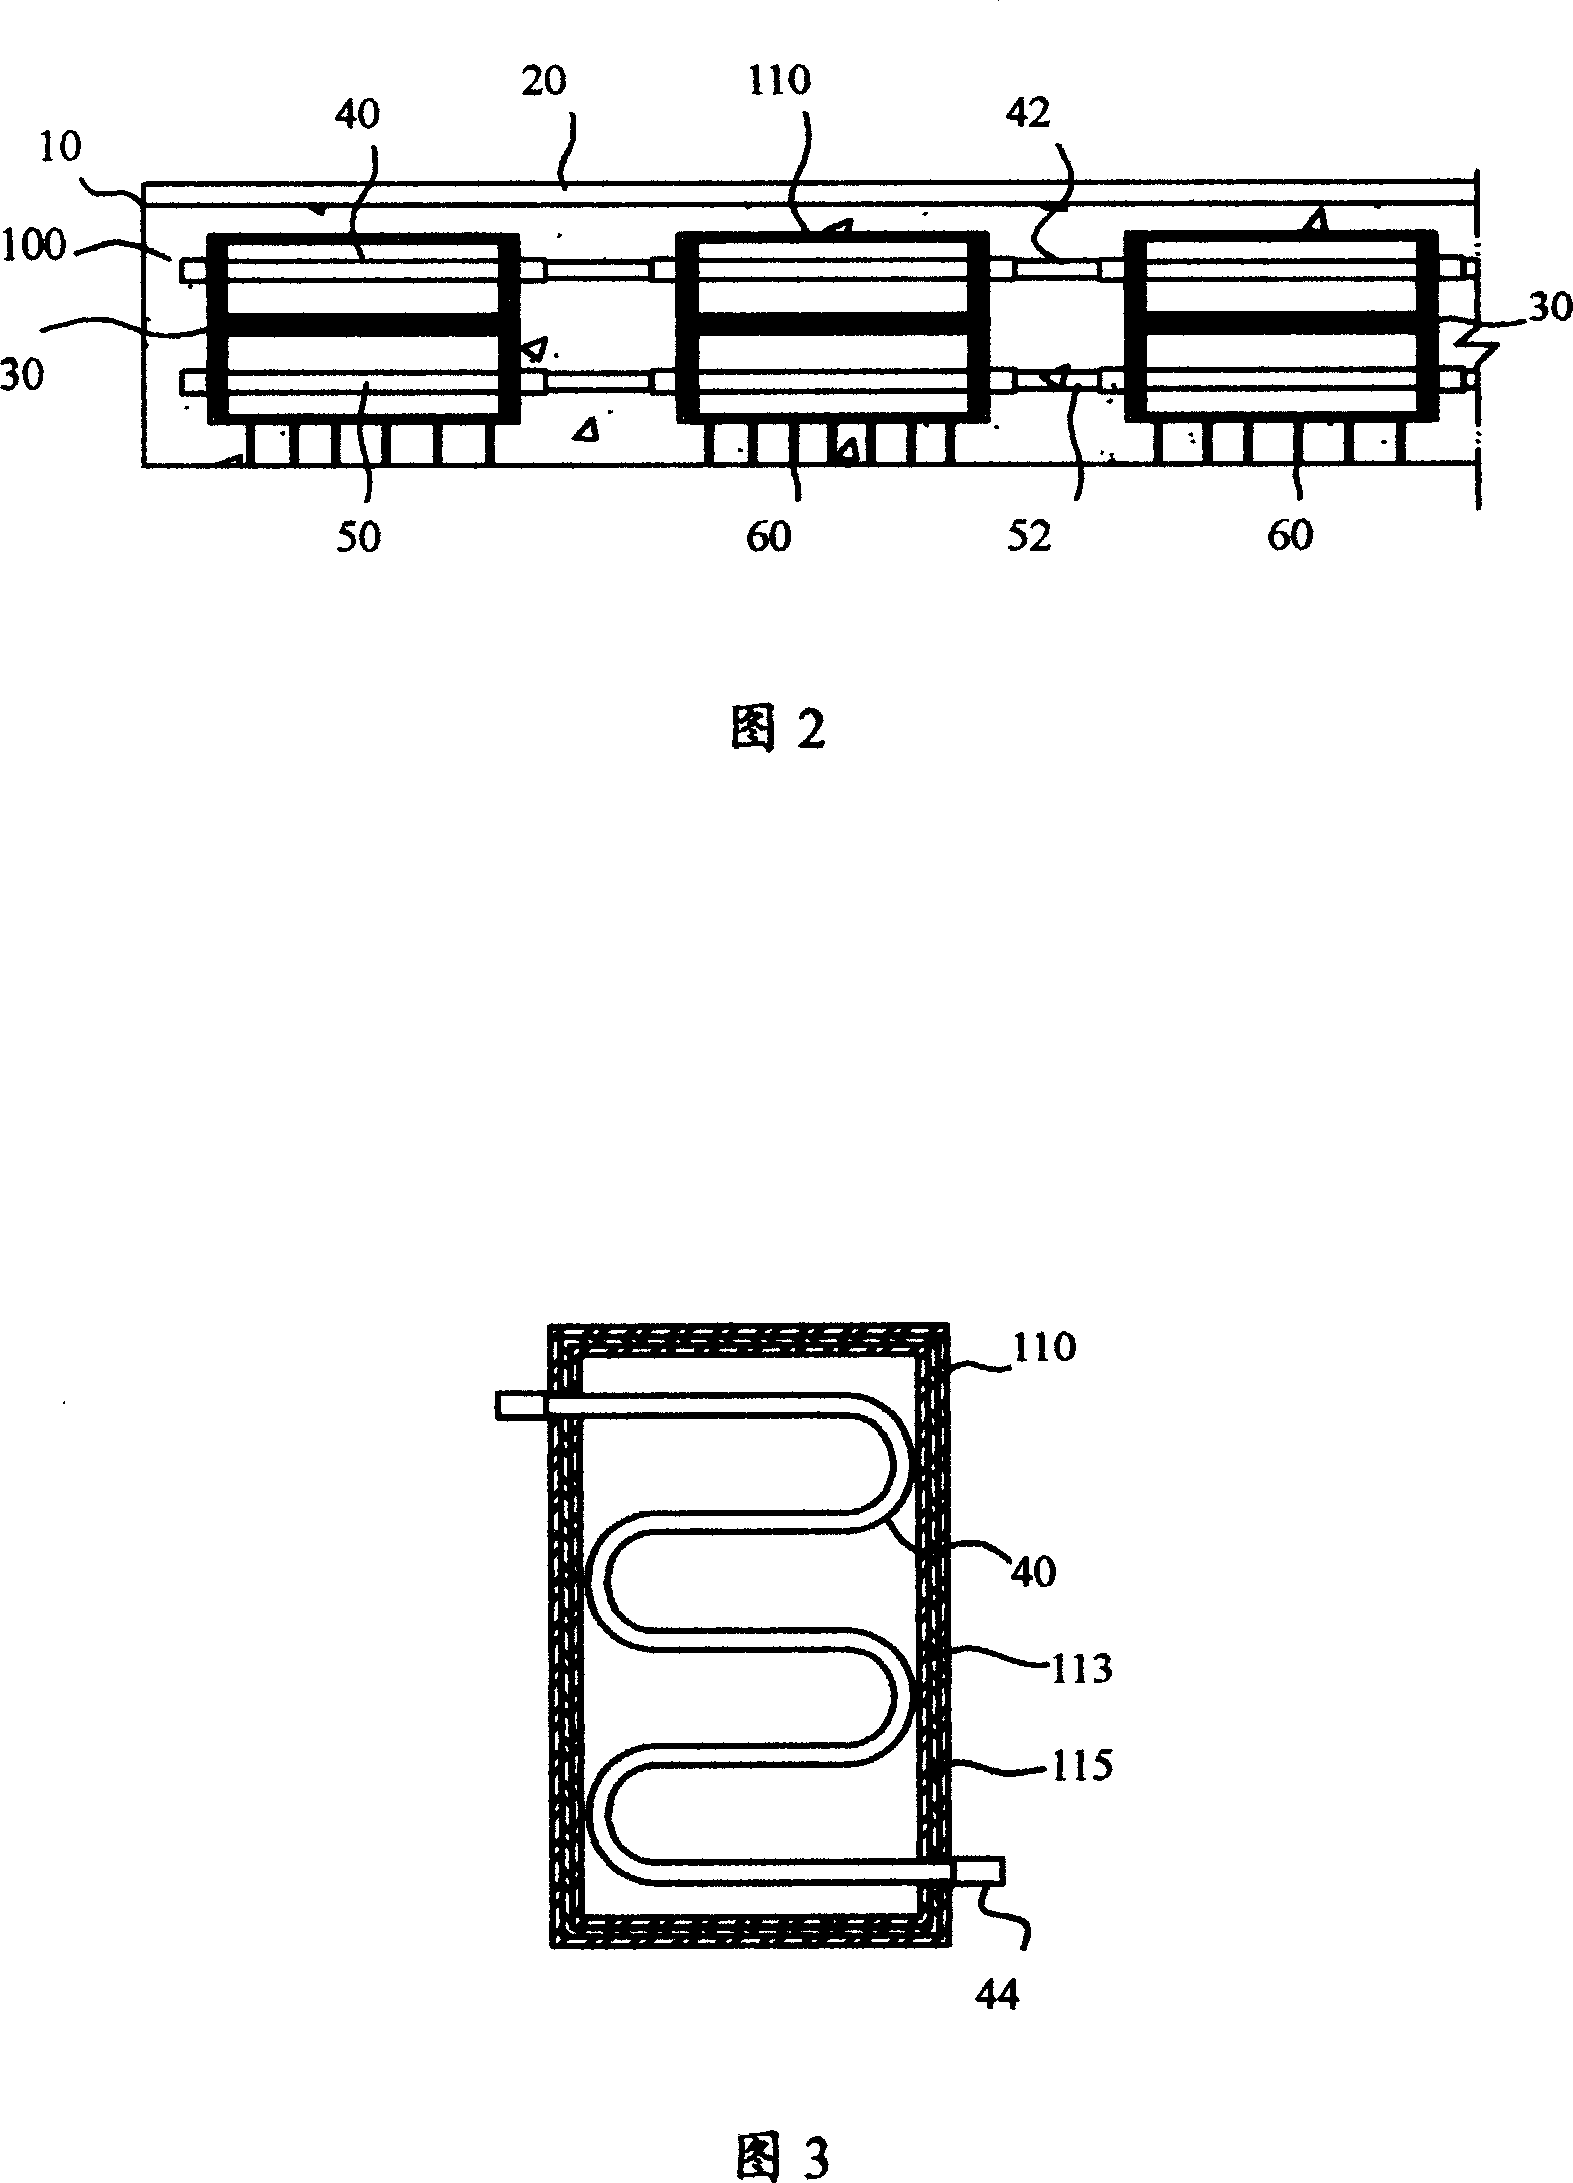 Hollow building floor with air-conditioning function for cast-in-situs reinforcing bar